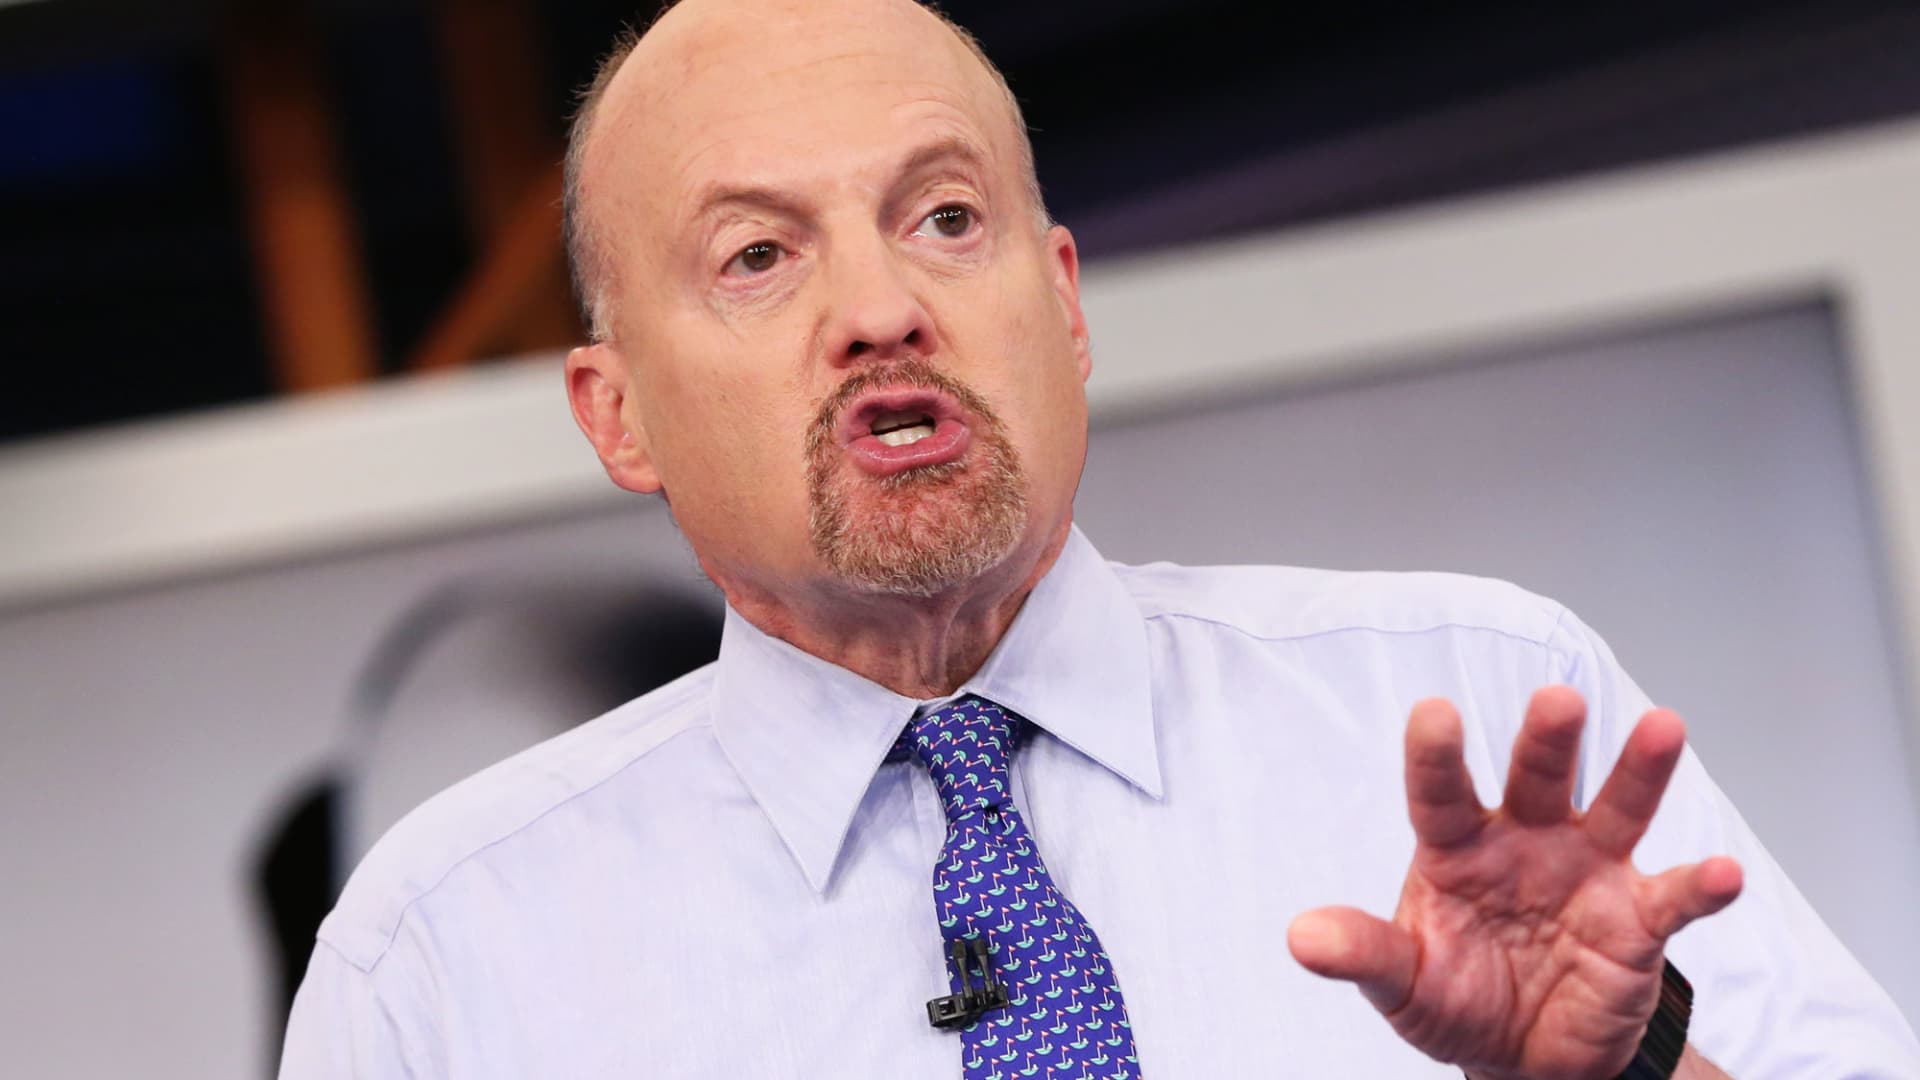 Jim Cramer says investors shouldn’t allow a tumultuous market prevent them from finding ‘better opportunities’